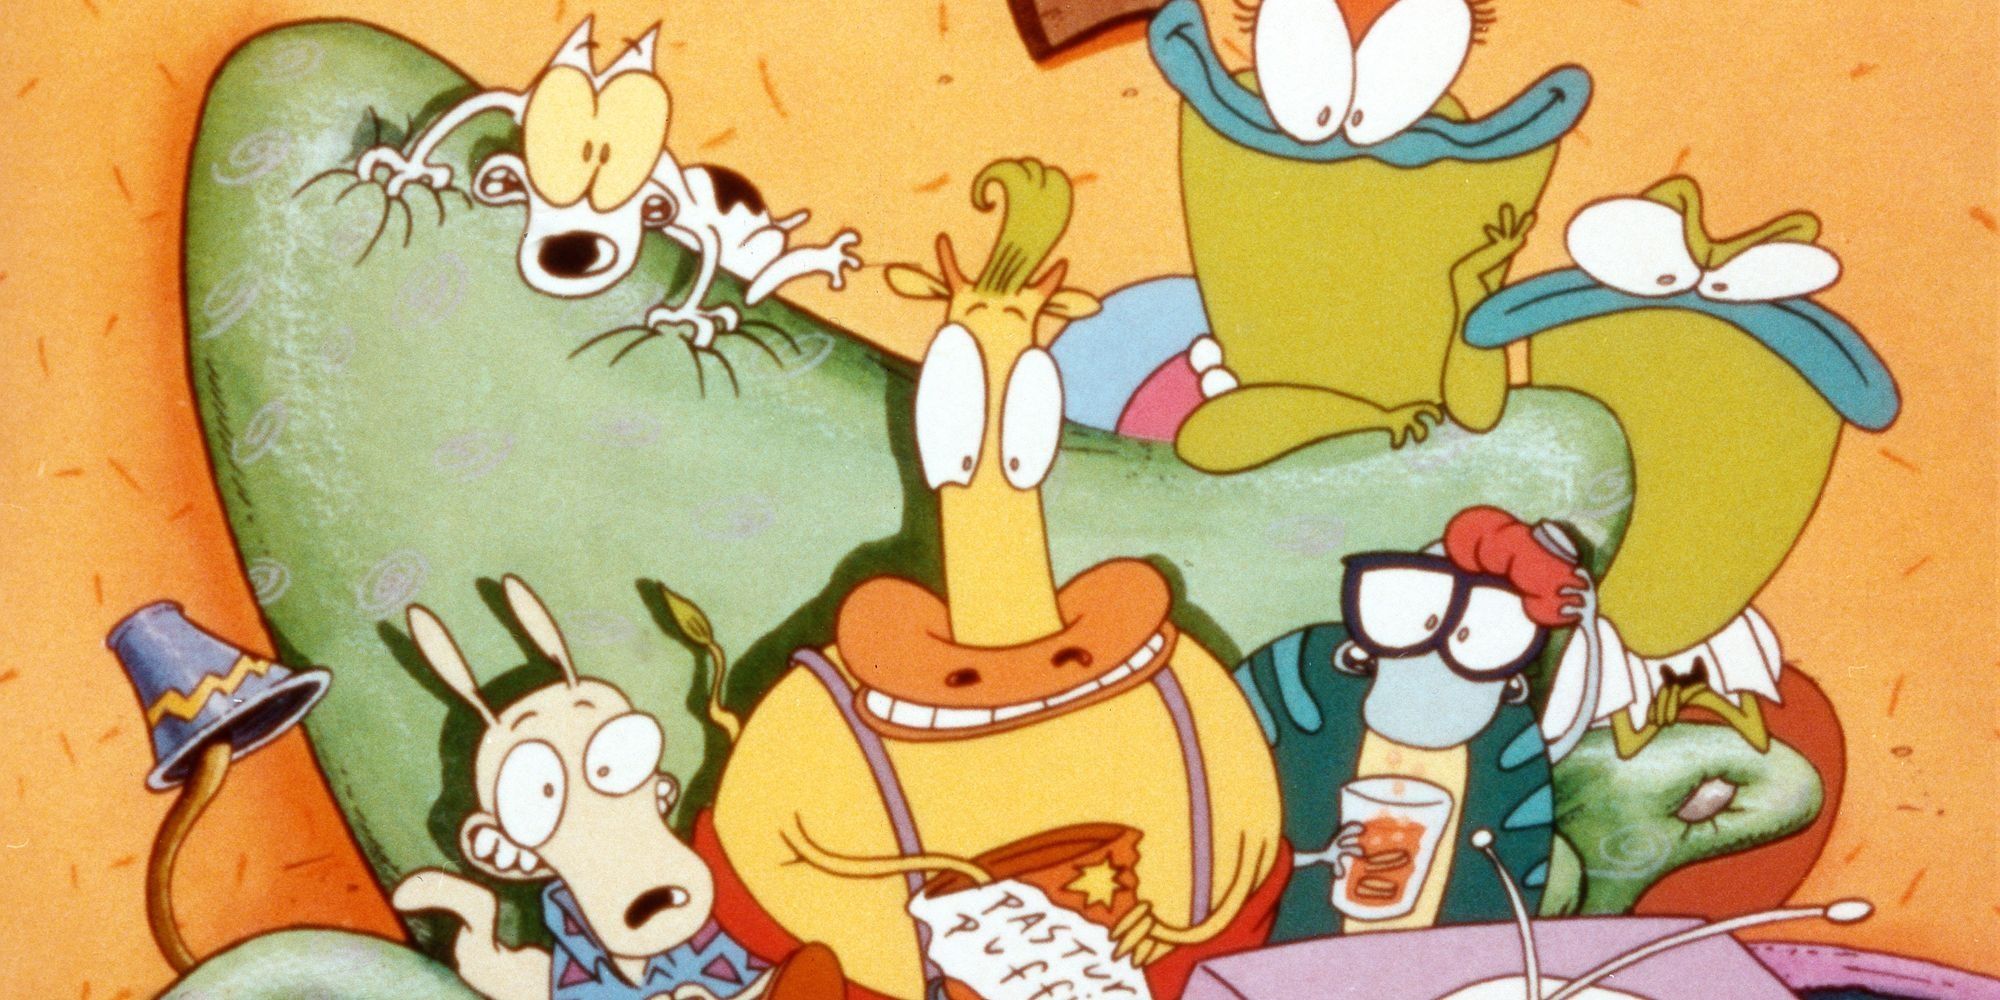 The main characters from Rocko's Modern Life.